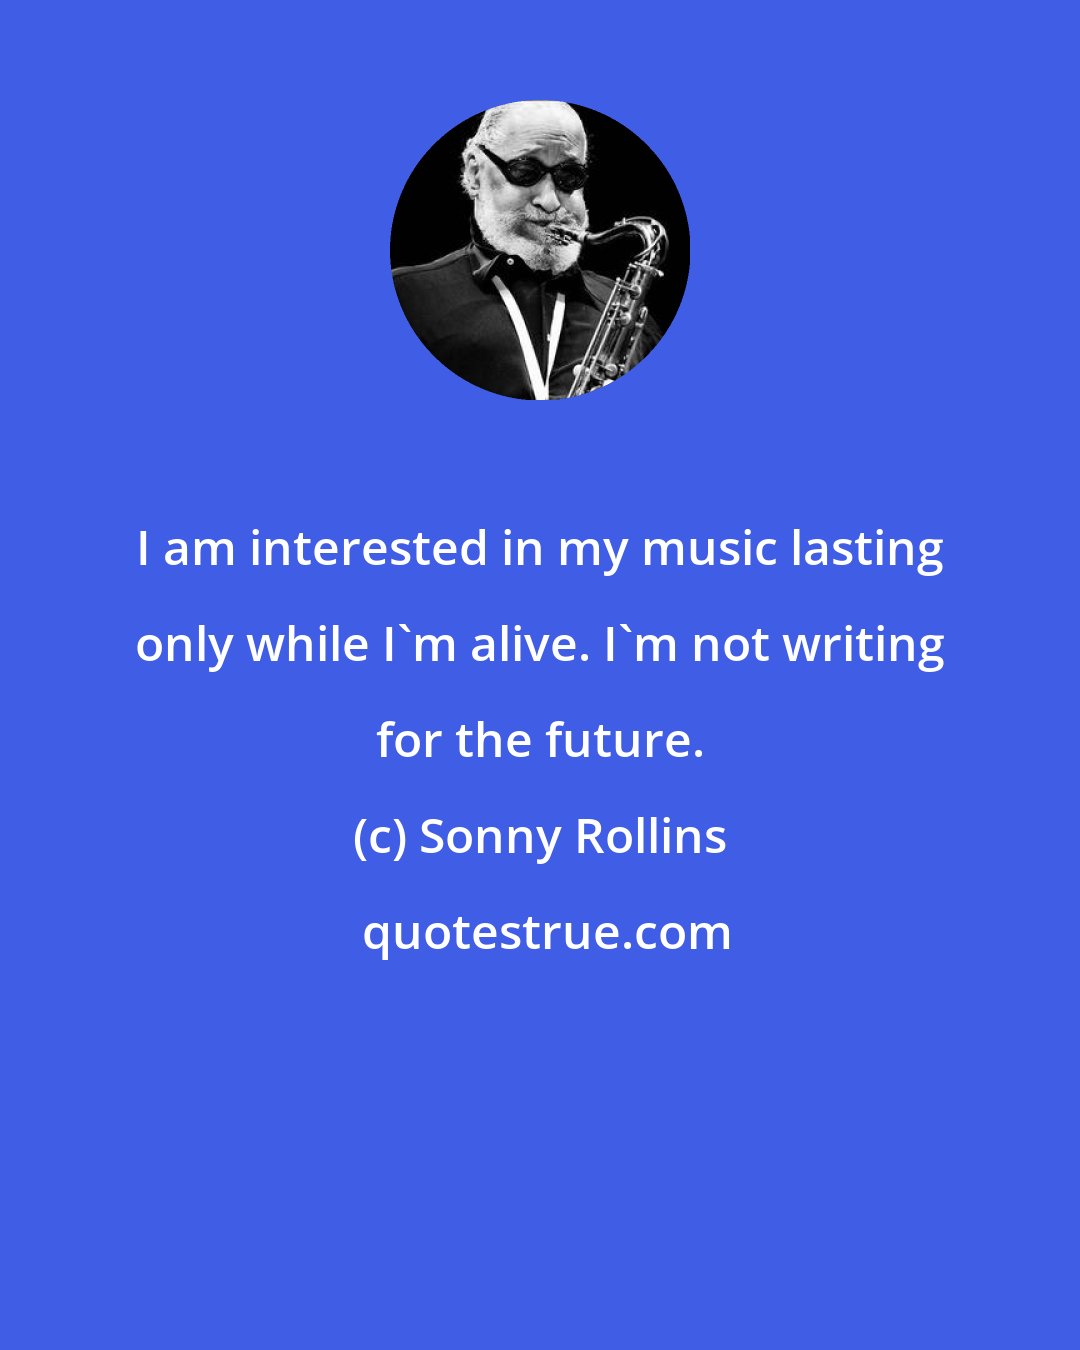 Sonny Rollins: I am interested in my music lasting only while I'm alive. I'm not writing for the future.